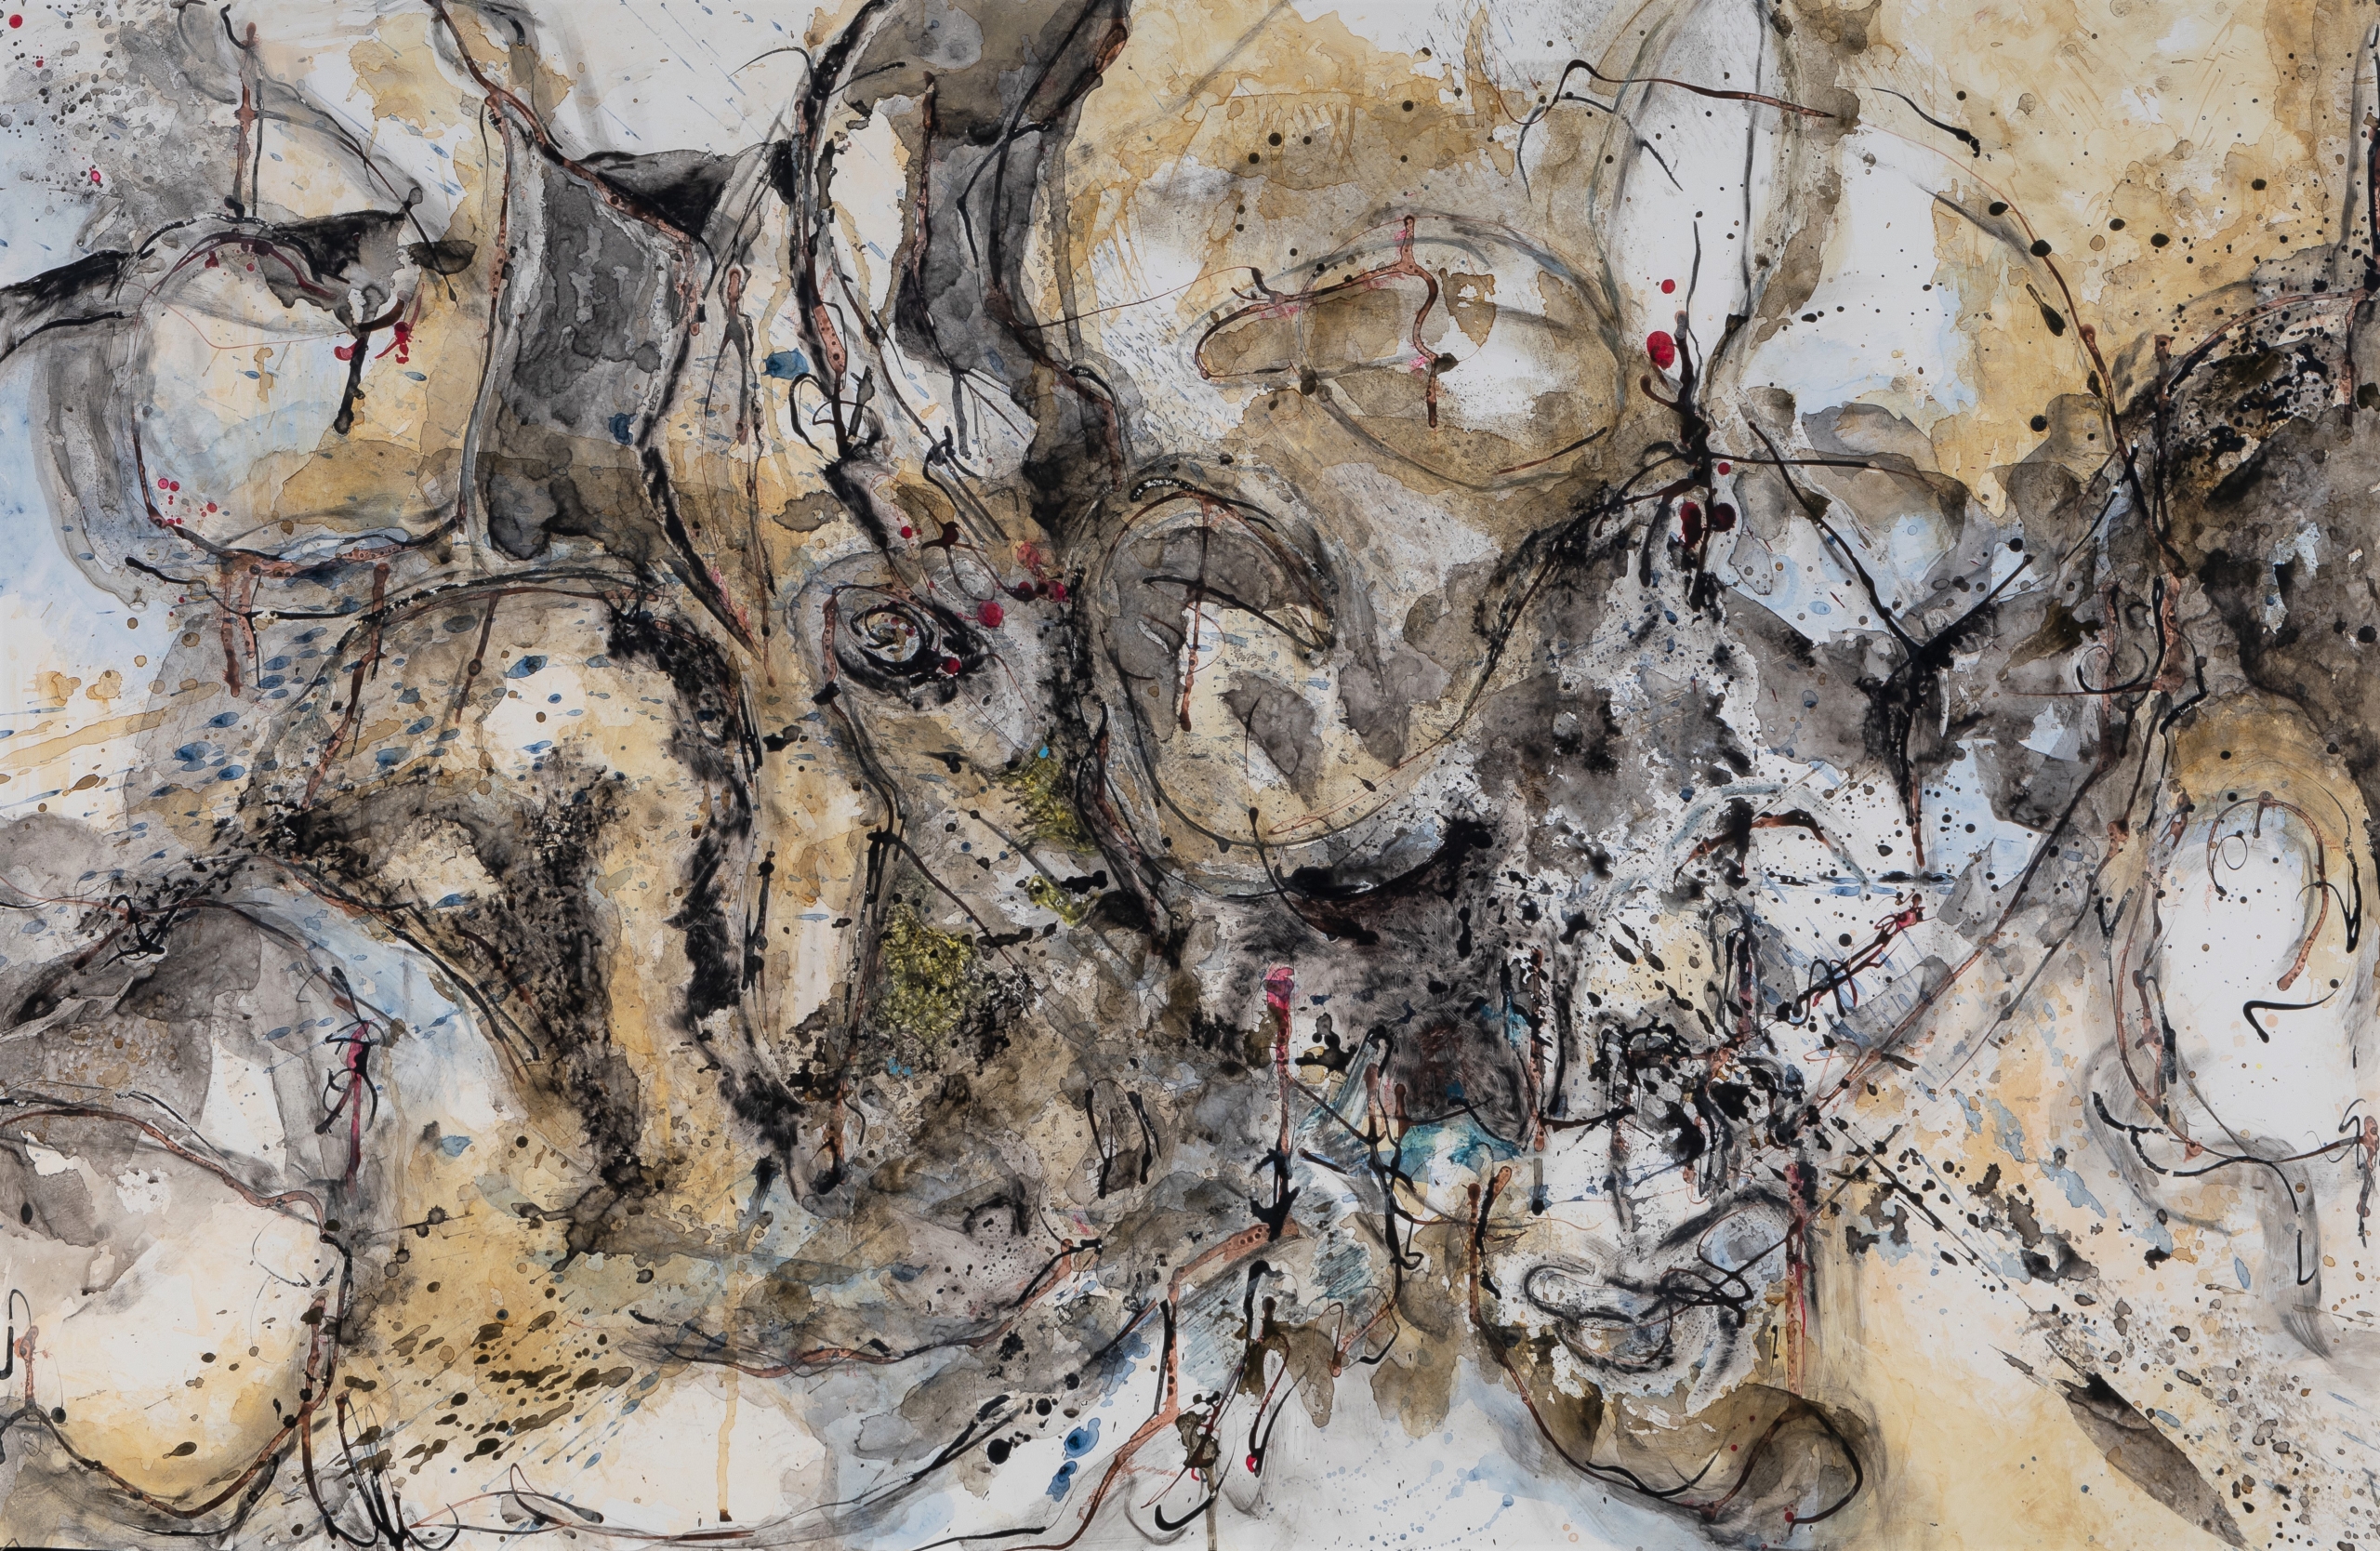 Ruach, 2018, mixed media on paper, 31.75 x 46 in large